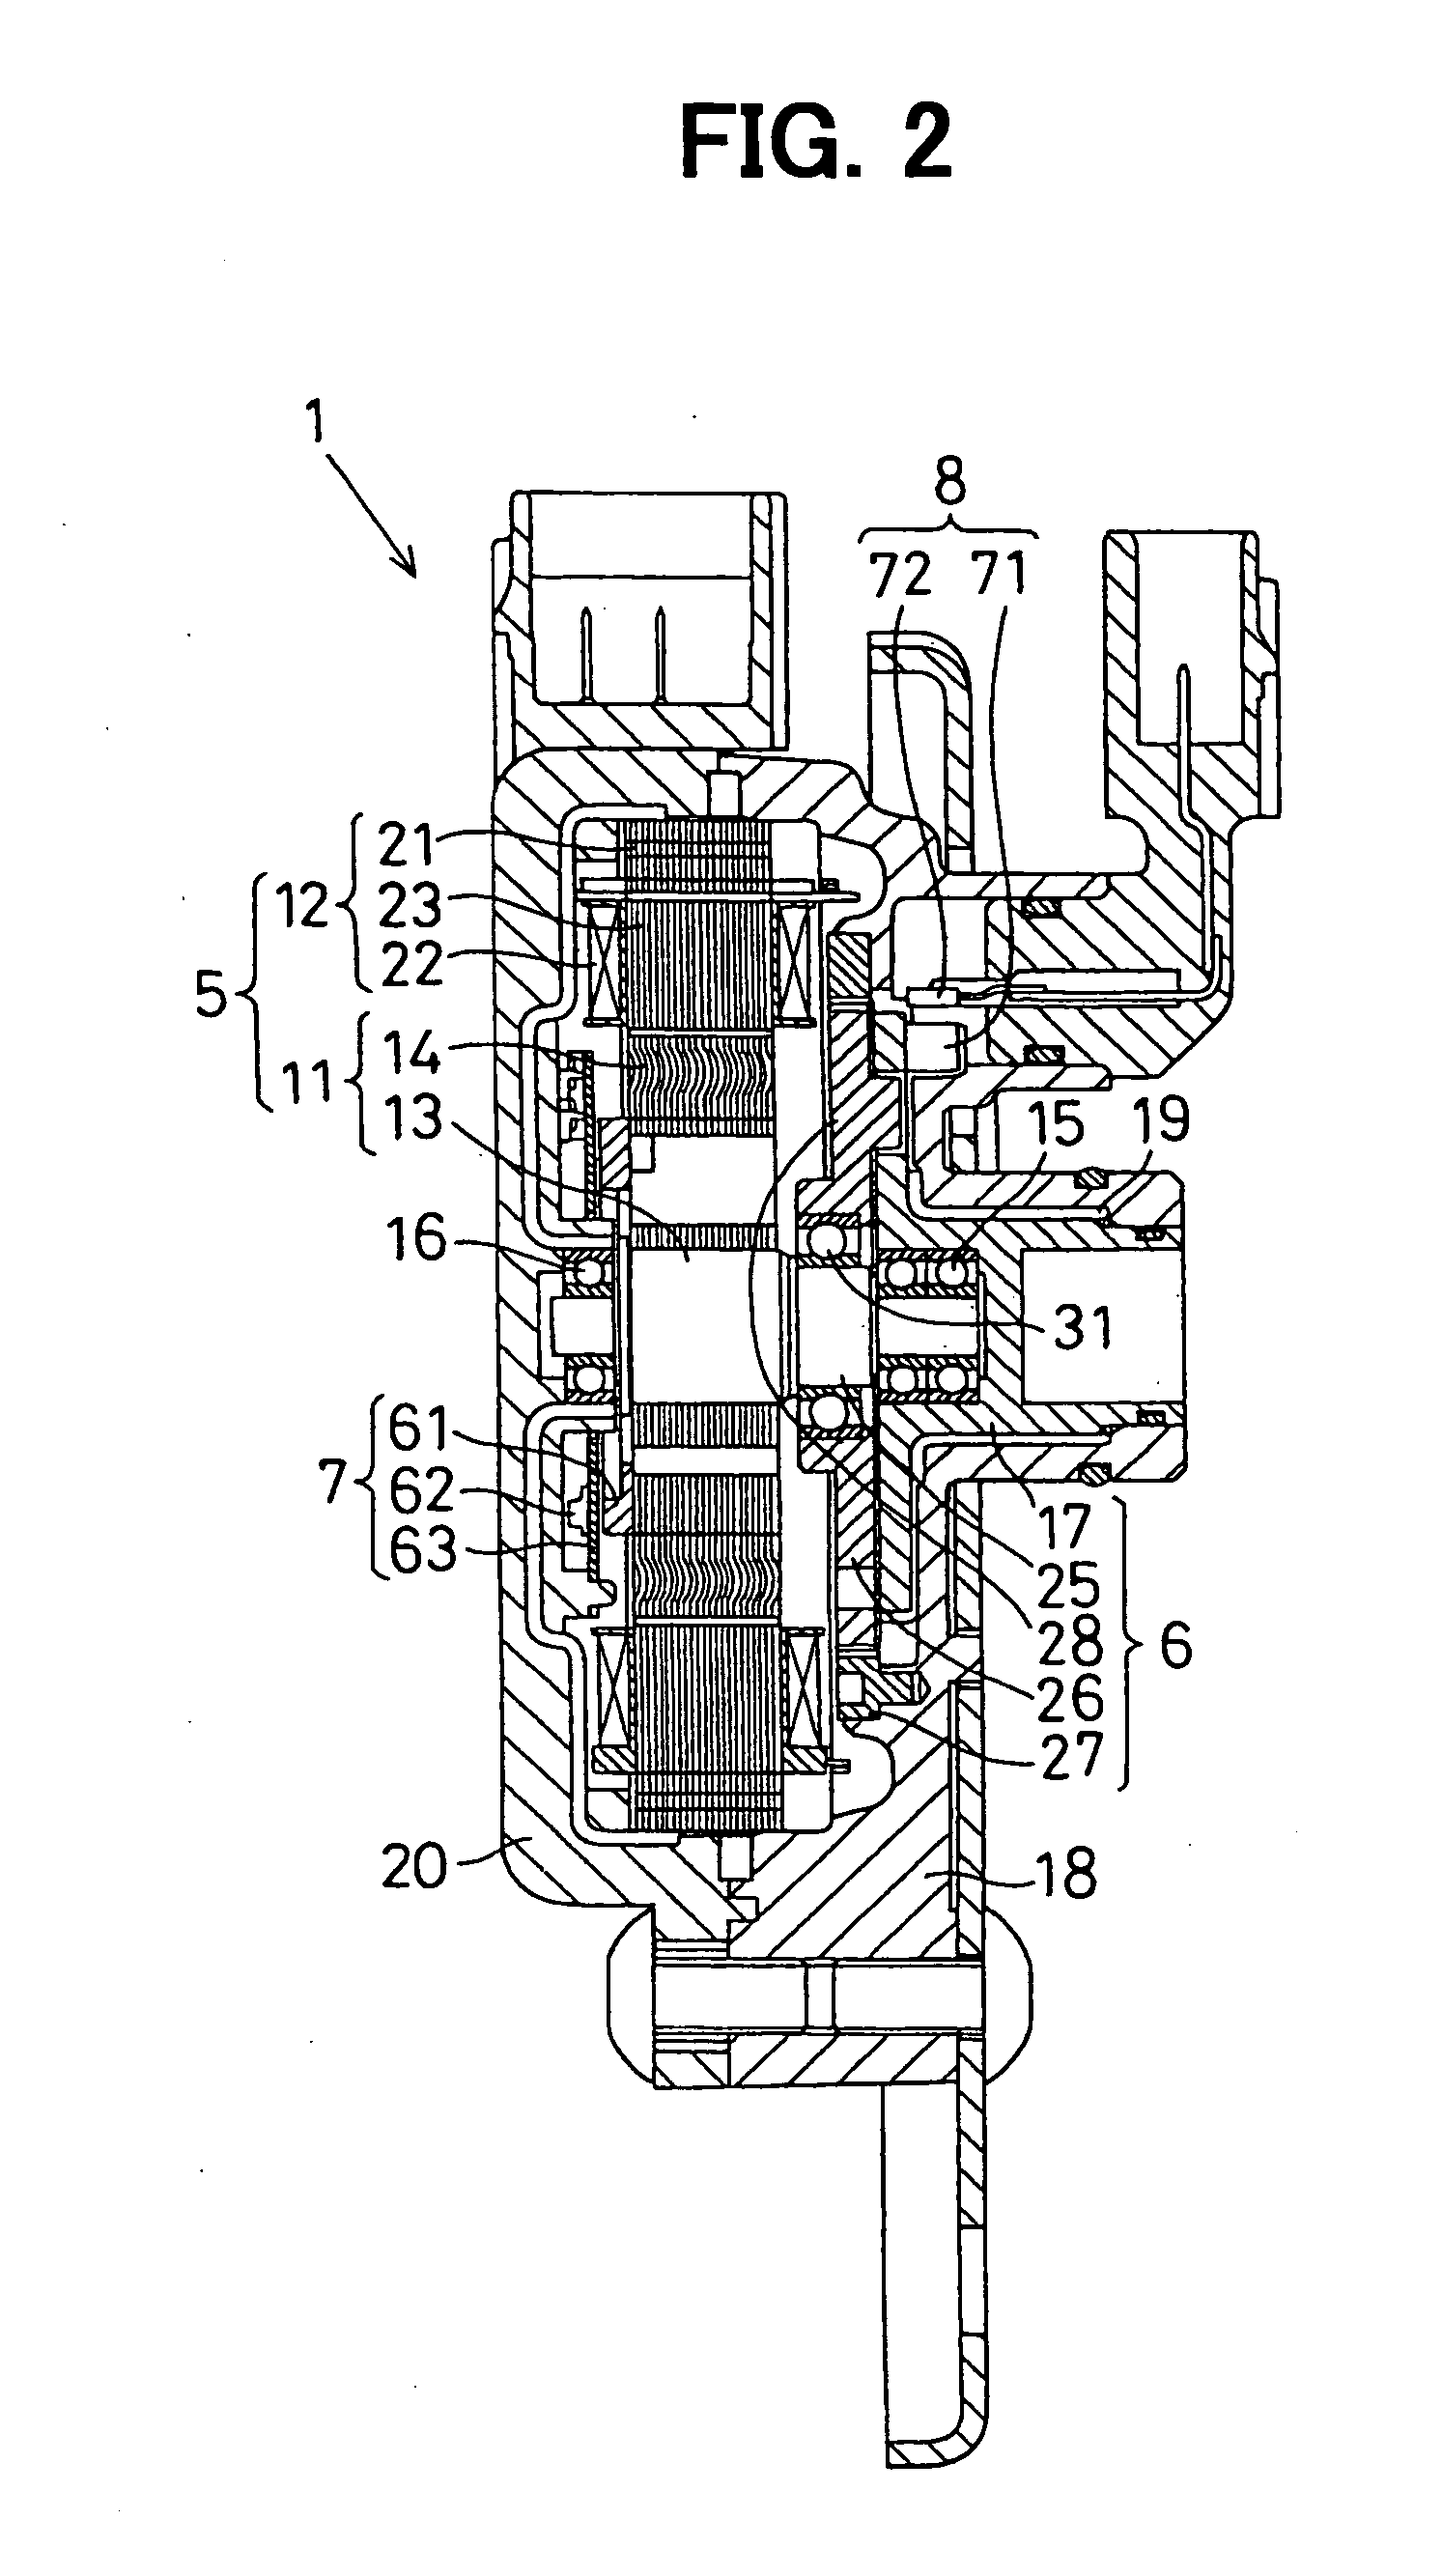 Switching controlling apparatus